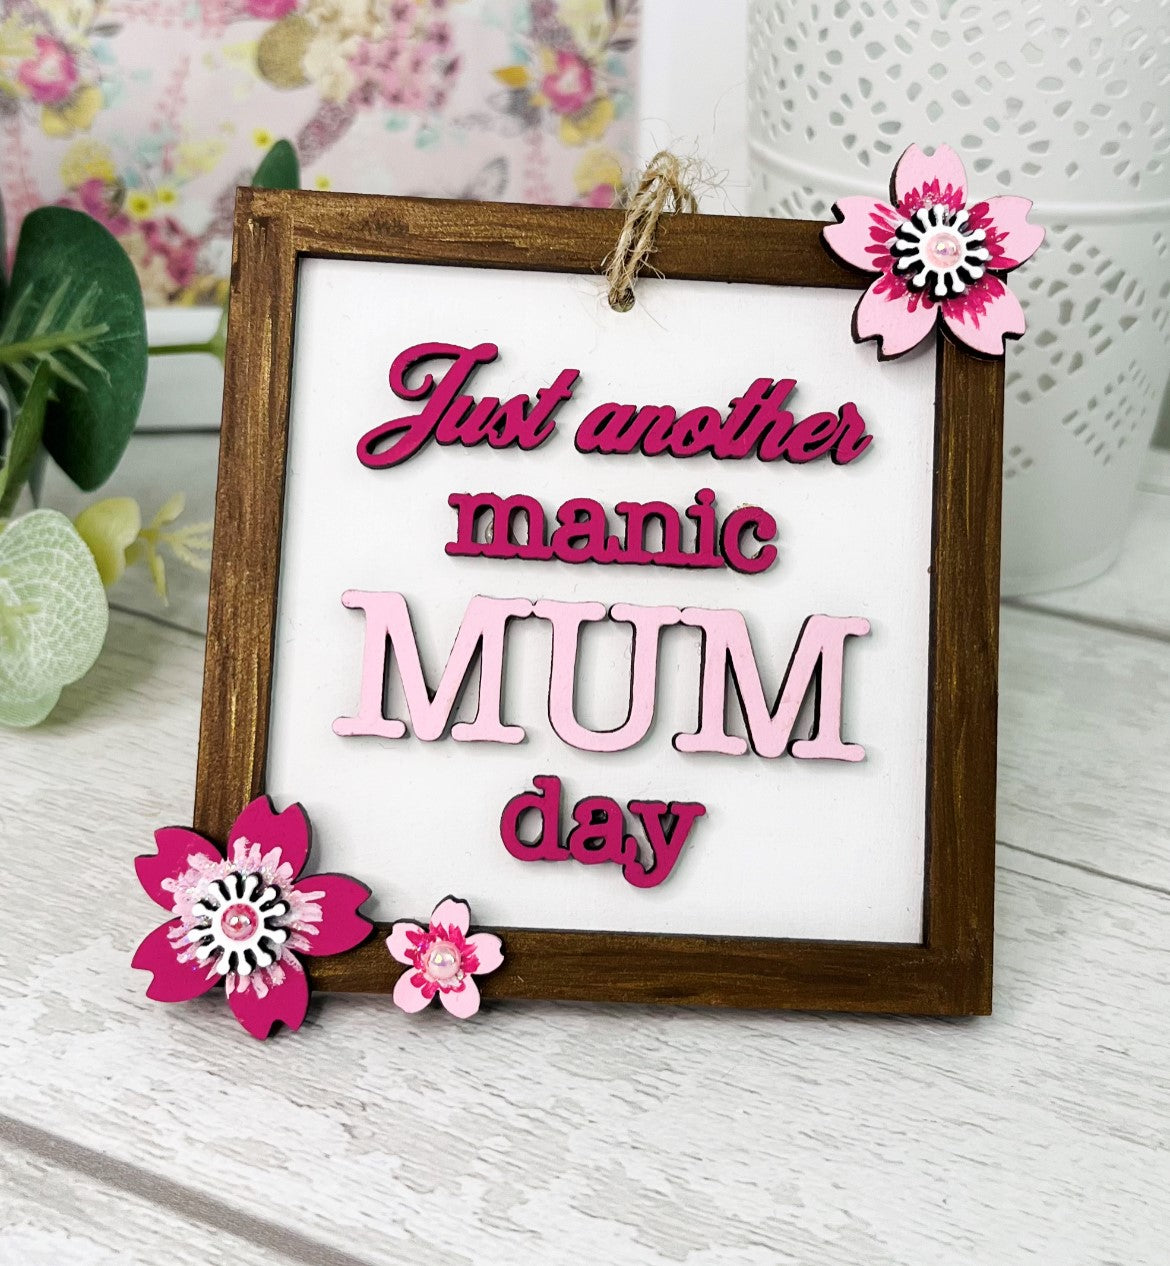 Just Another Manic Mum Day, Handmade Gifts & Keepsakes for mum this mothers day - Sweet Pea Wooden Creations